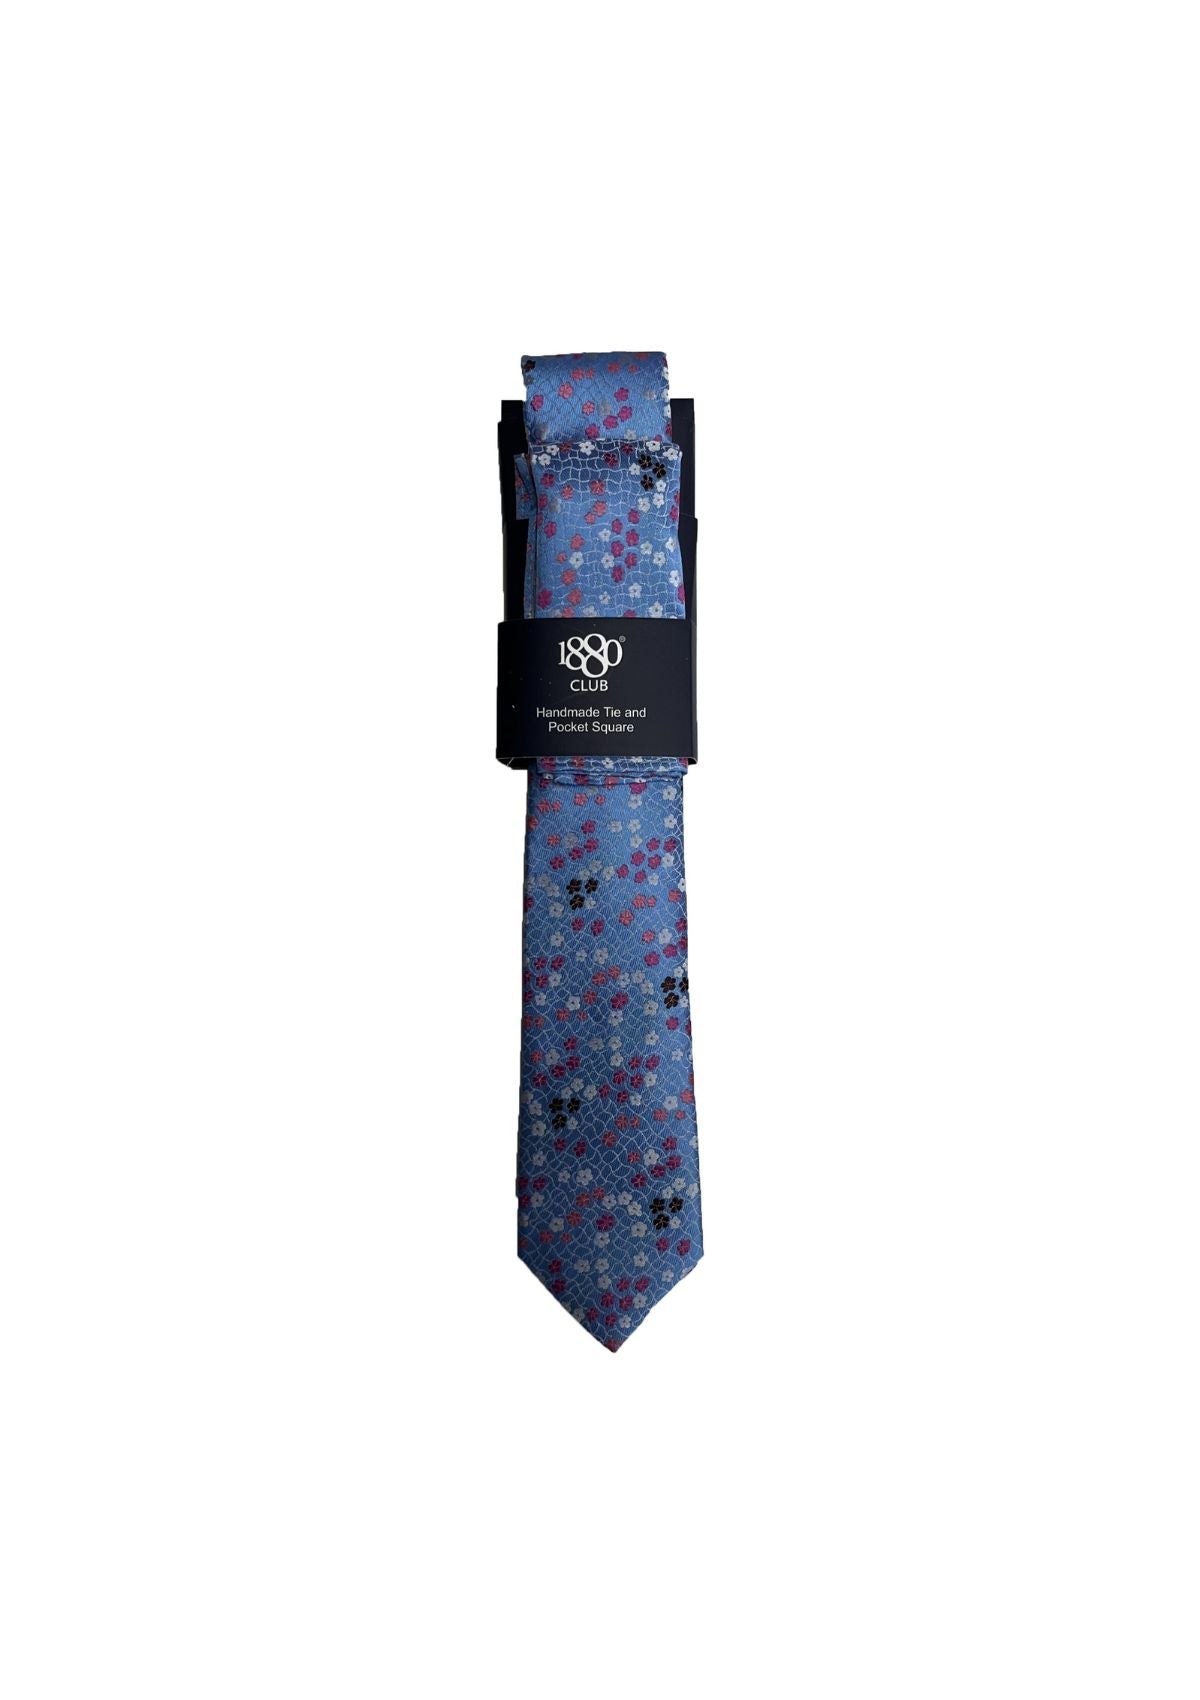 1880 Club Floral Navy Tie and Pocket Square Set